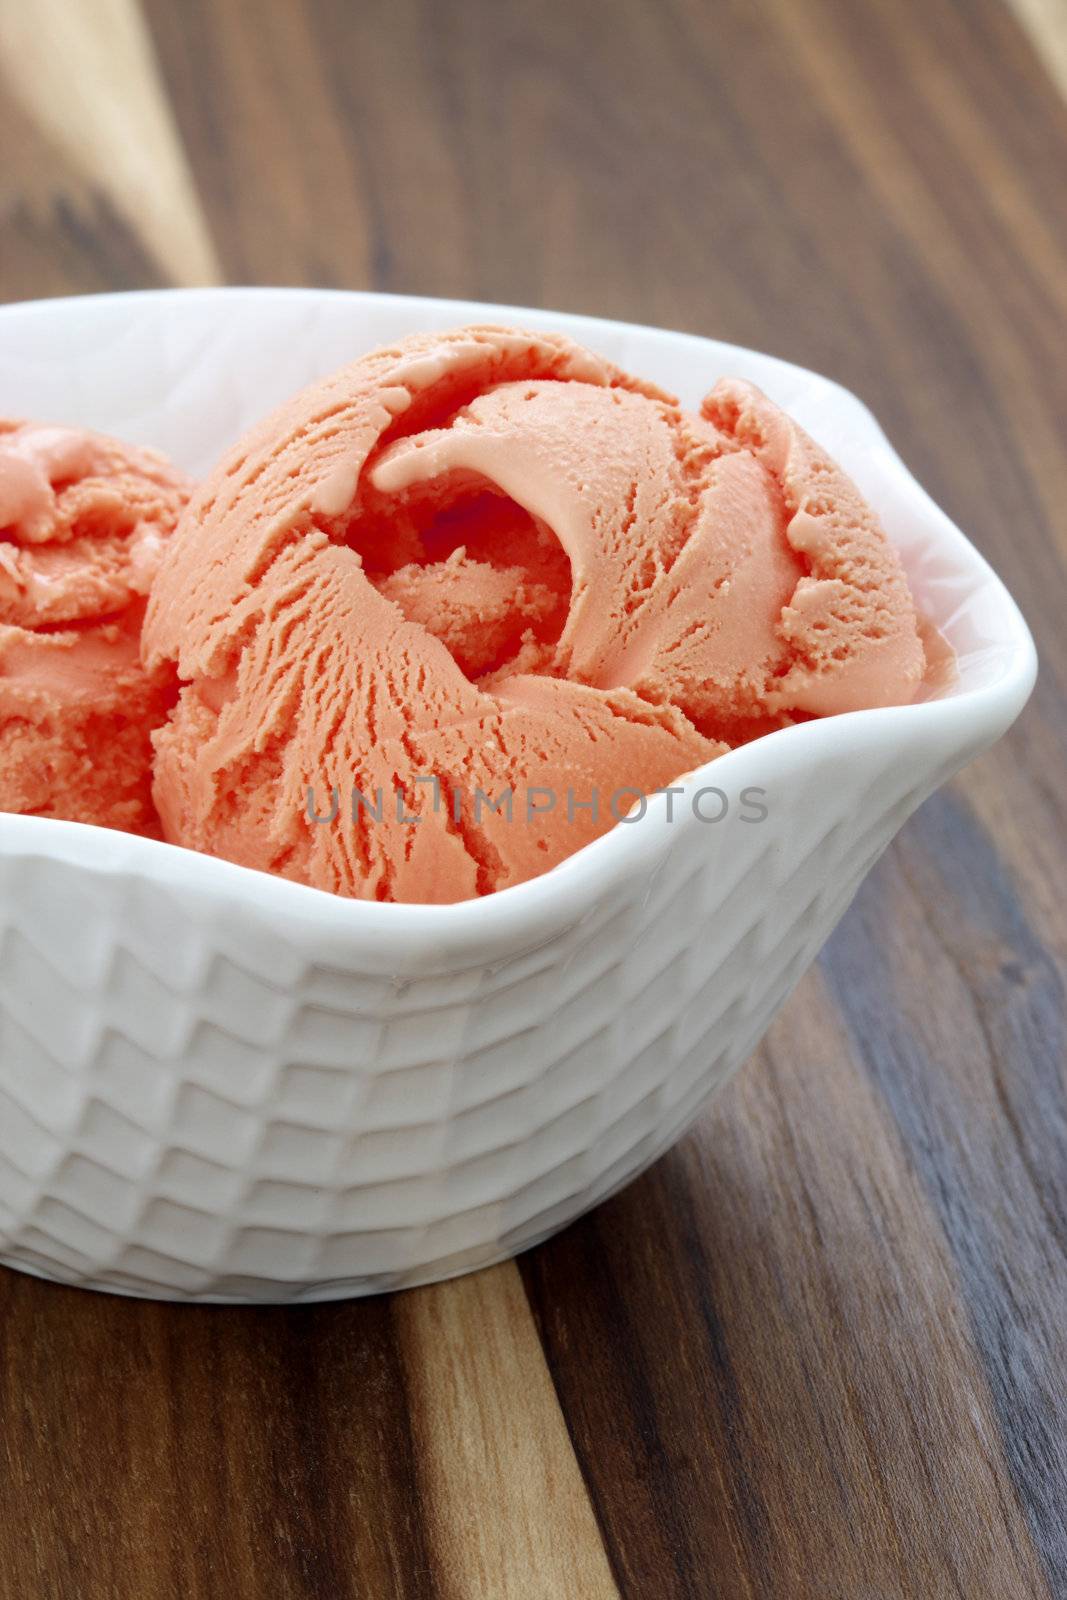 real gourmet mandarin ice cream, not made with mashed potatoes or shortening and meets all the regulations regarding using real dairy products to advertise dairy. 